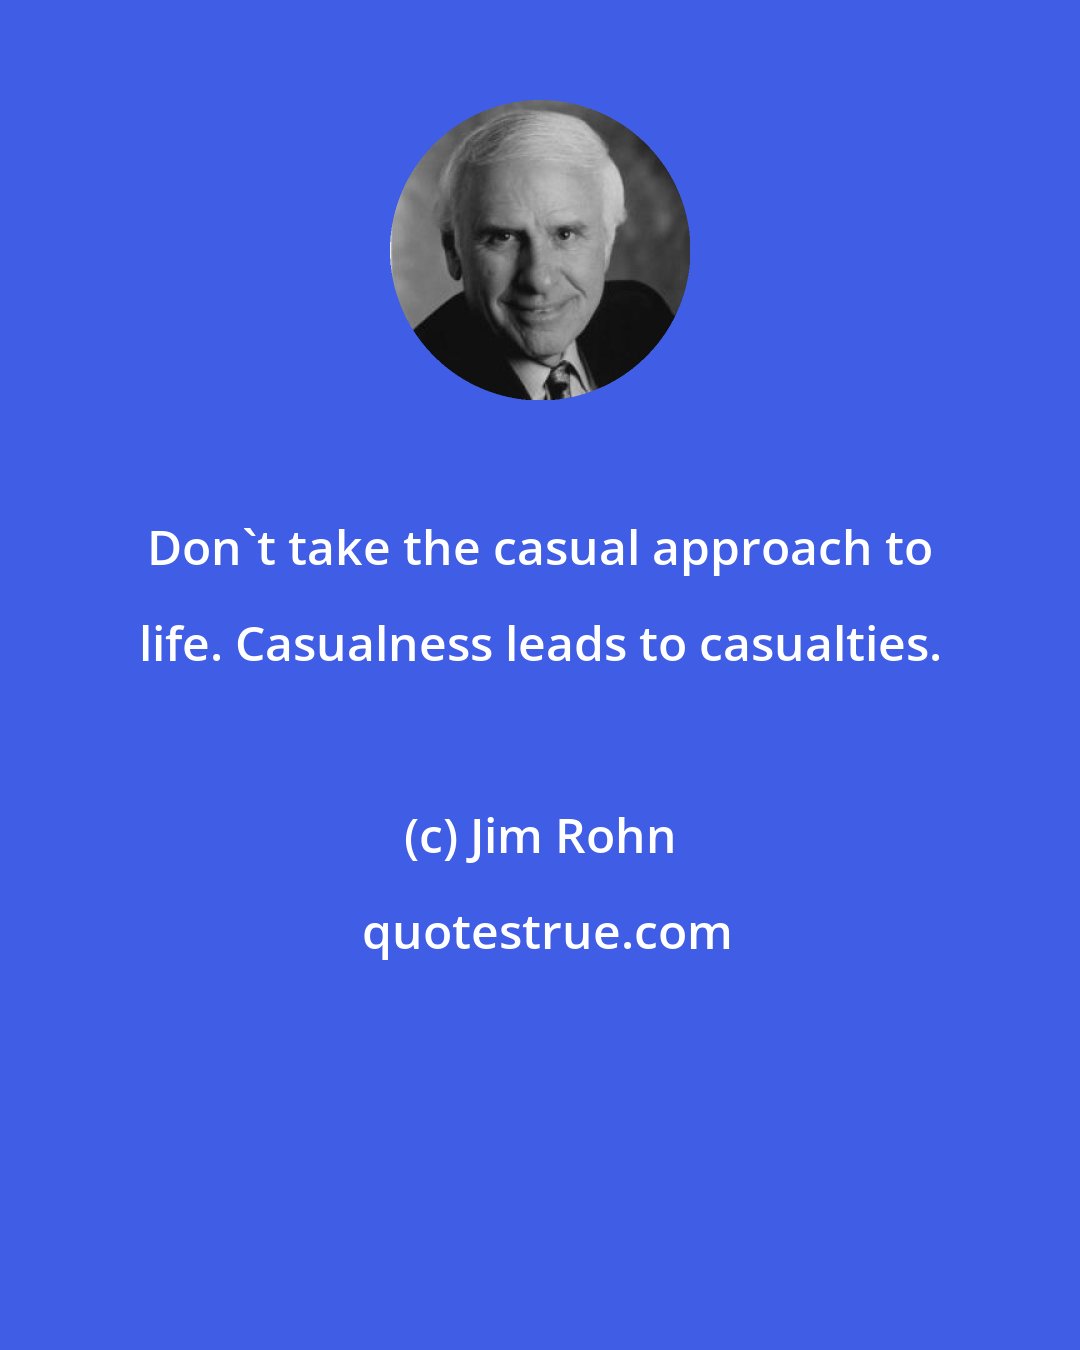 Jim Rohn: Don't take the casual approach to life. Casualness leads to casualties.